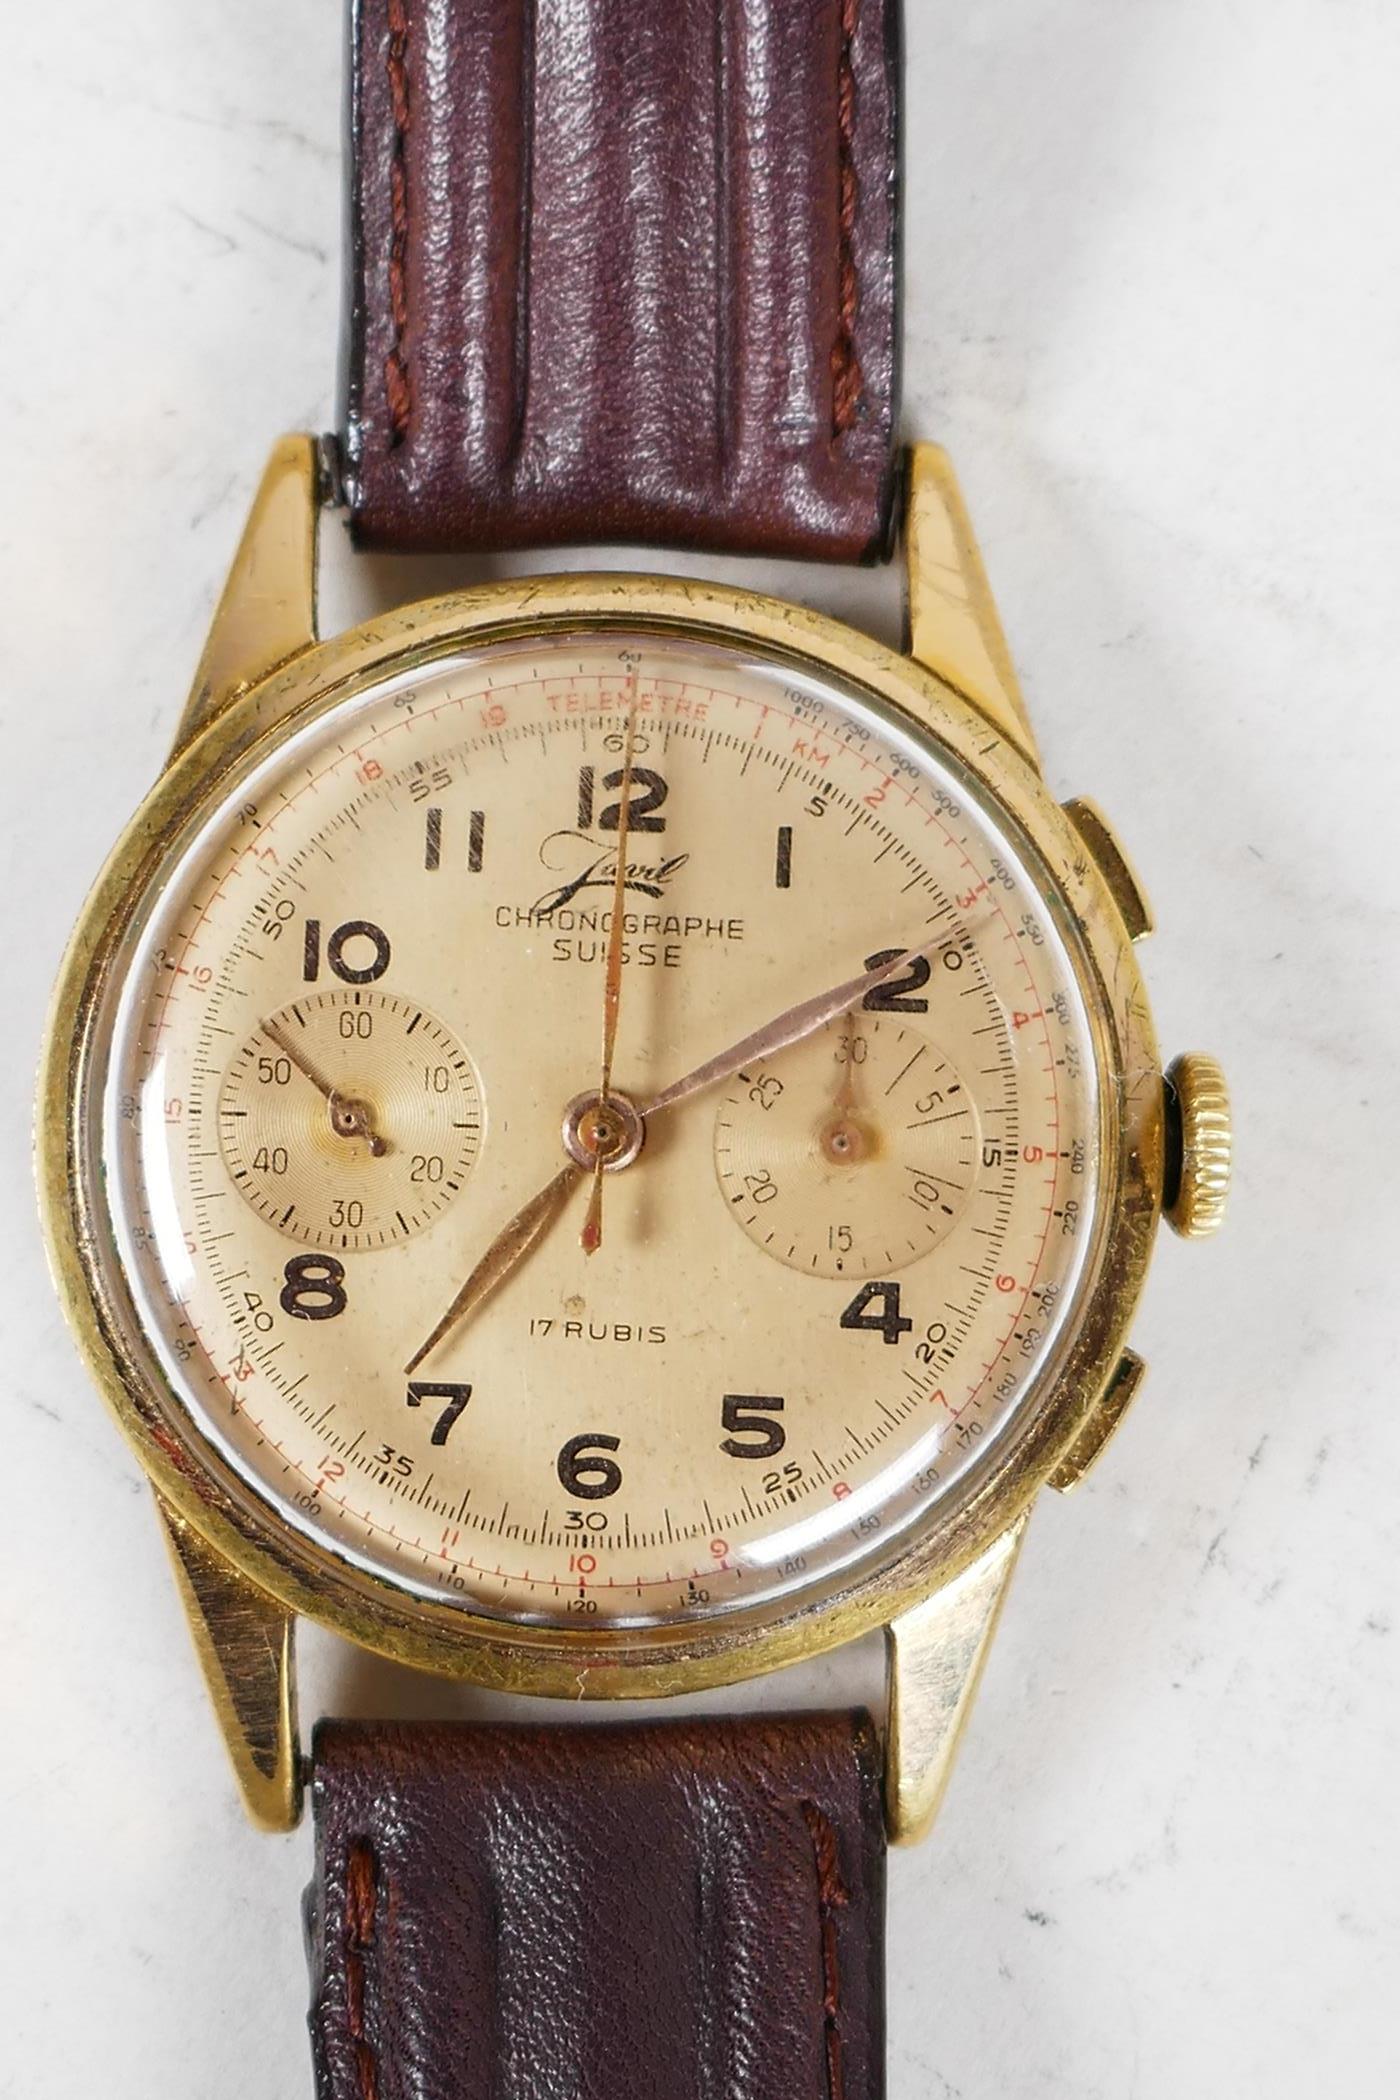 A vintage Swiss made gentleman's wristwatch by Janil, the face with secondary day and seconds dial